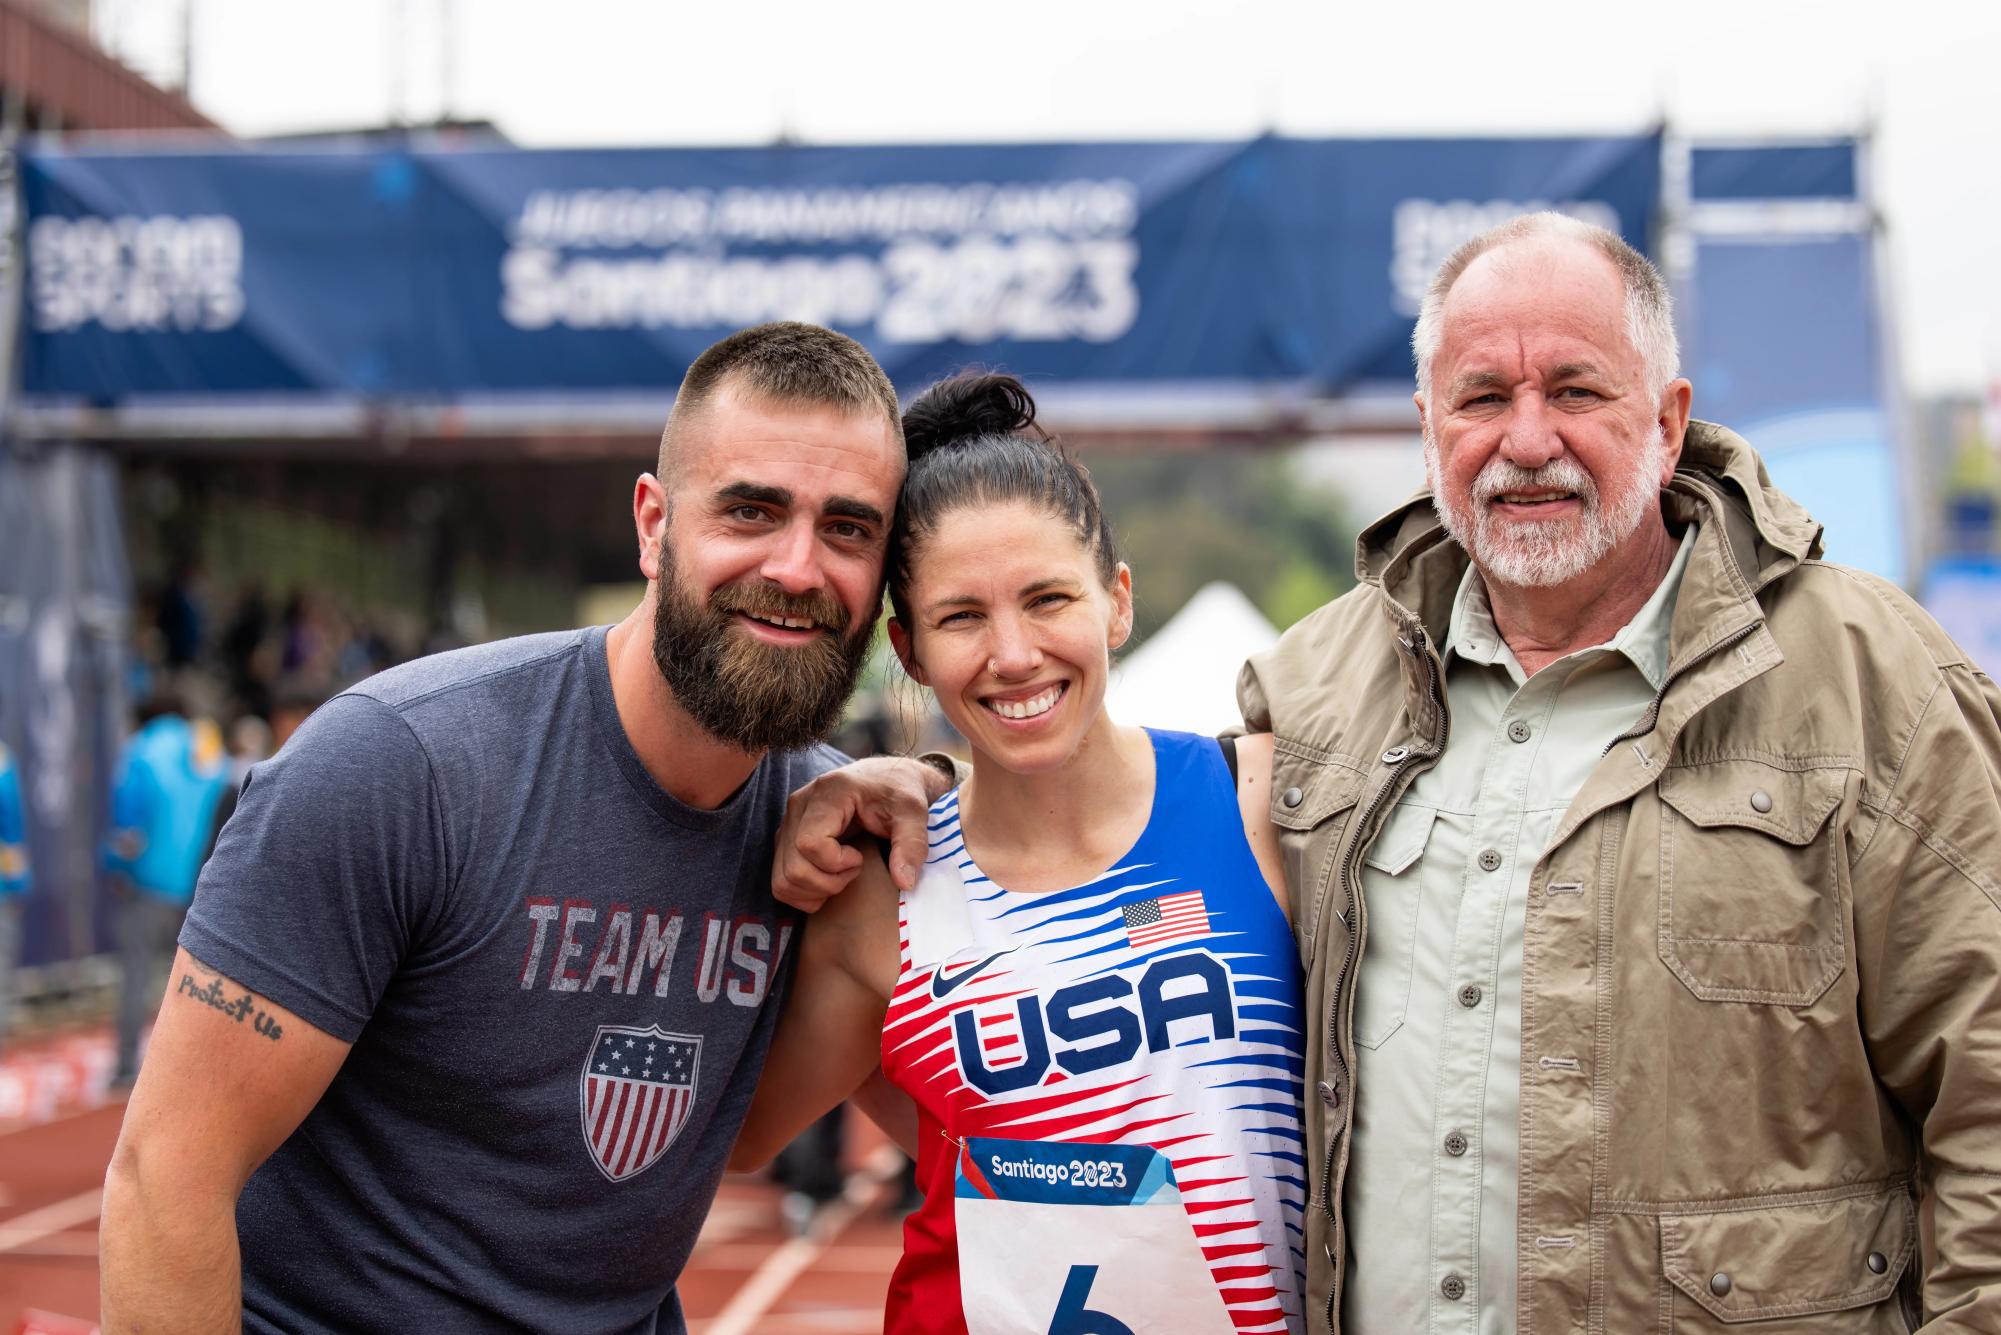 Jess Davis, center, celebrates with her husband and father after competing in the womens modern pentathlon final during the Pan American Games Santiago 2023 on Oct. 23, 2023 in Santiago, Chile. (Courtesy of Joe Kusumoto/U.S. Modern Pentathlon)